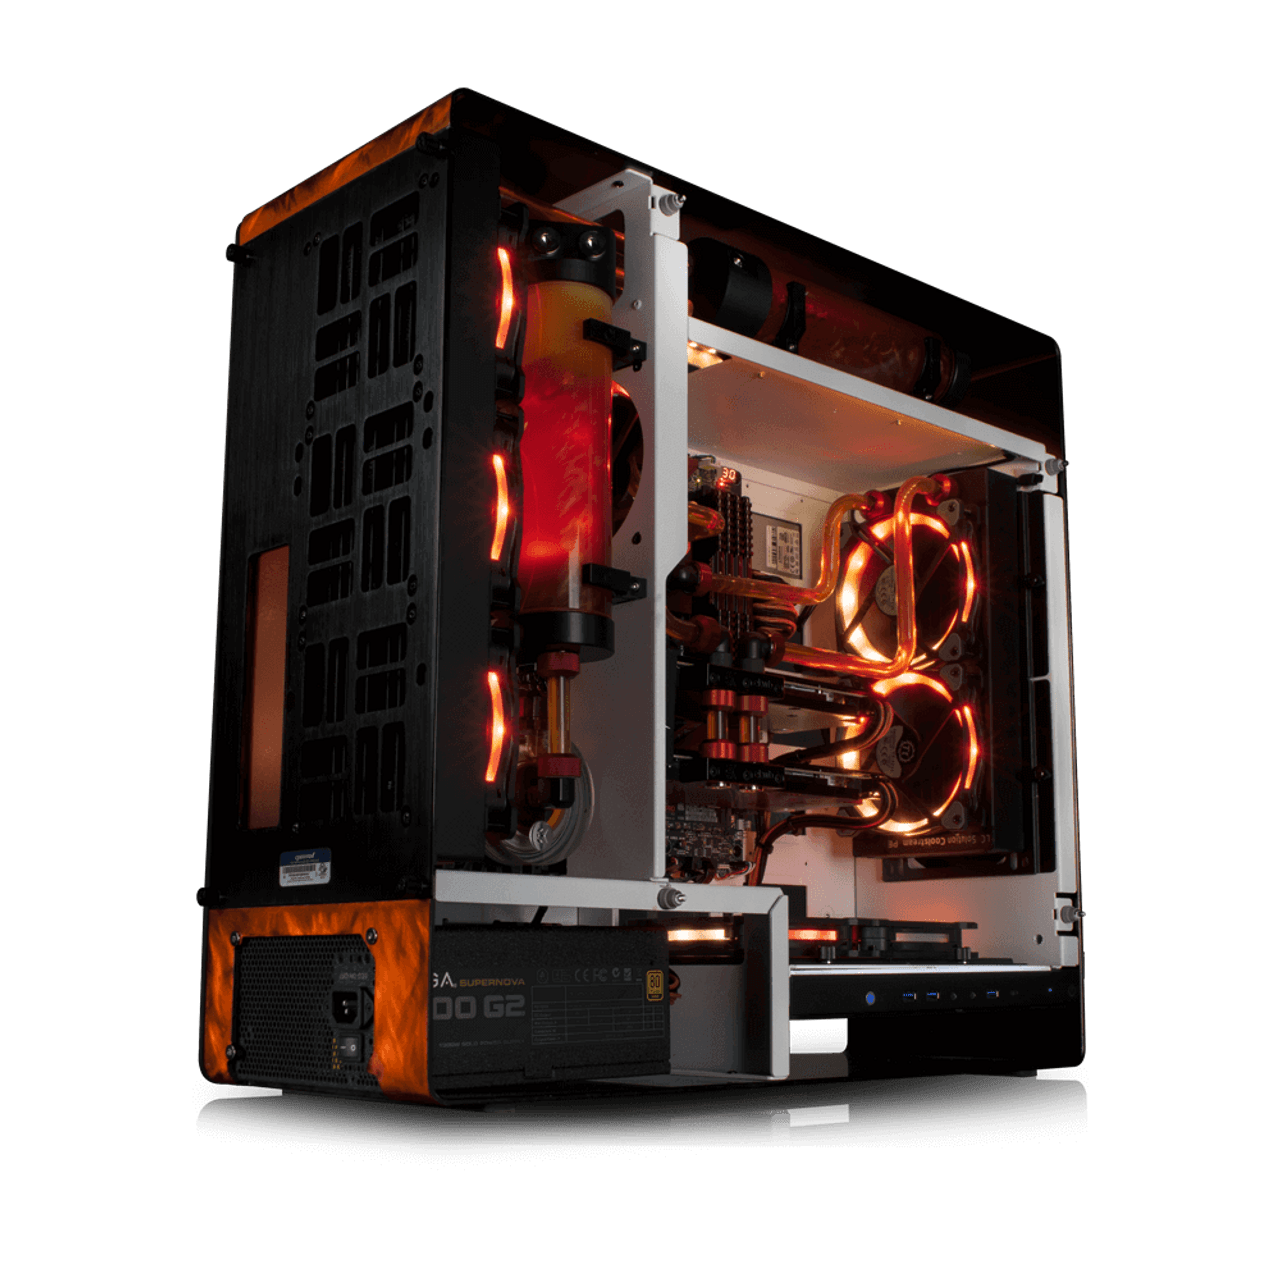 Custom Configured System/ Core i9 9960 3.10GHz C16 OEM/ 360mm Liquid Cooler for CPUs/ Intel 299 Chipset motherboard/ (8) 16GB DDR4 3200 PC4-25600 V Series/ (2) Quadro RT 5000 16GD6 4DP USB-C/ 10/100/1000 Gigabit Network Onboard/ Onboard Sound/ 2TB 97